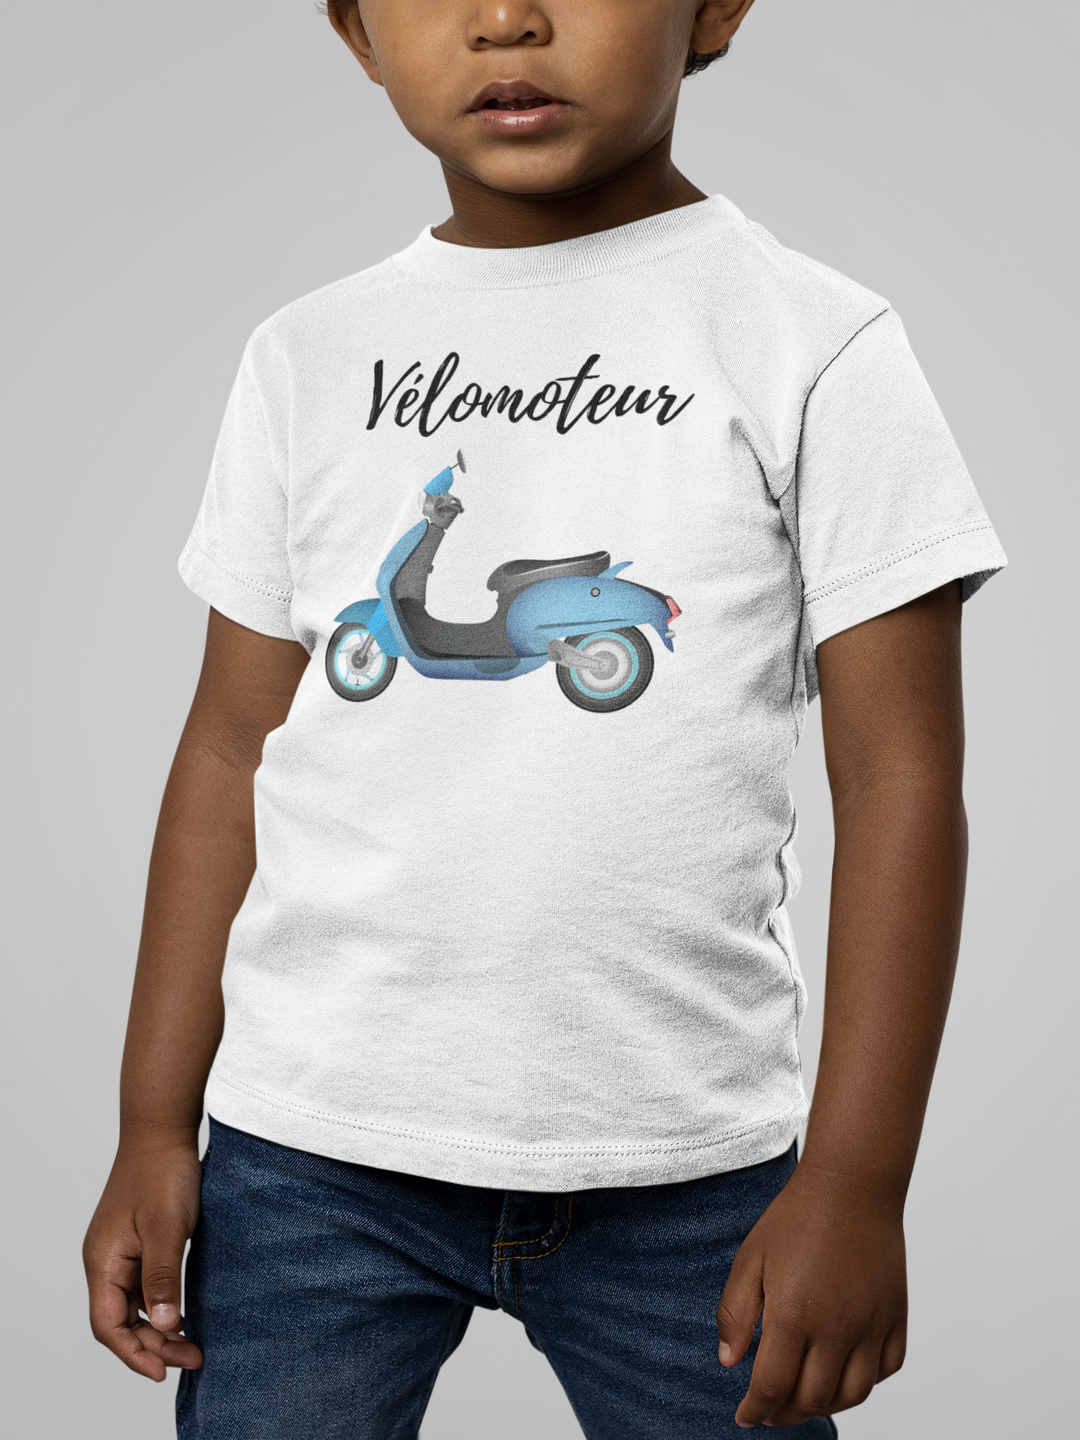 Vélomoteur. T-shirts for toddlers and kids up for a biking adventure. - TeesForToddlersandKids -  t-shirt - biking - velomoteur-short-sleeve-t-shirt-for-toddler-and-kids-the-biking-series